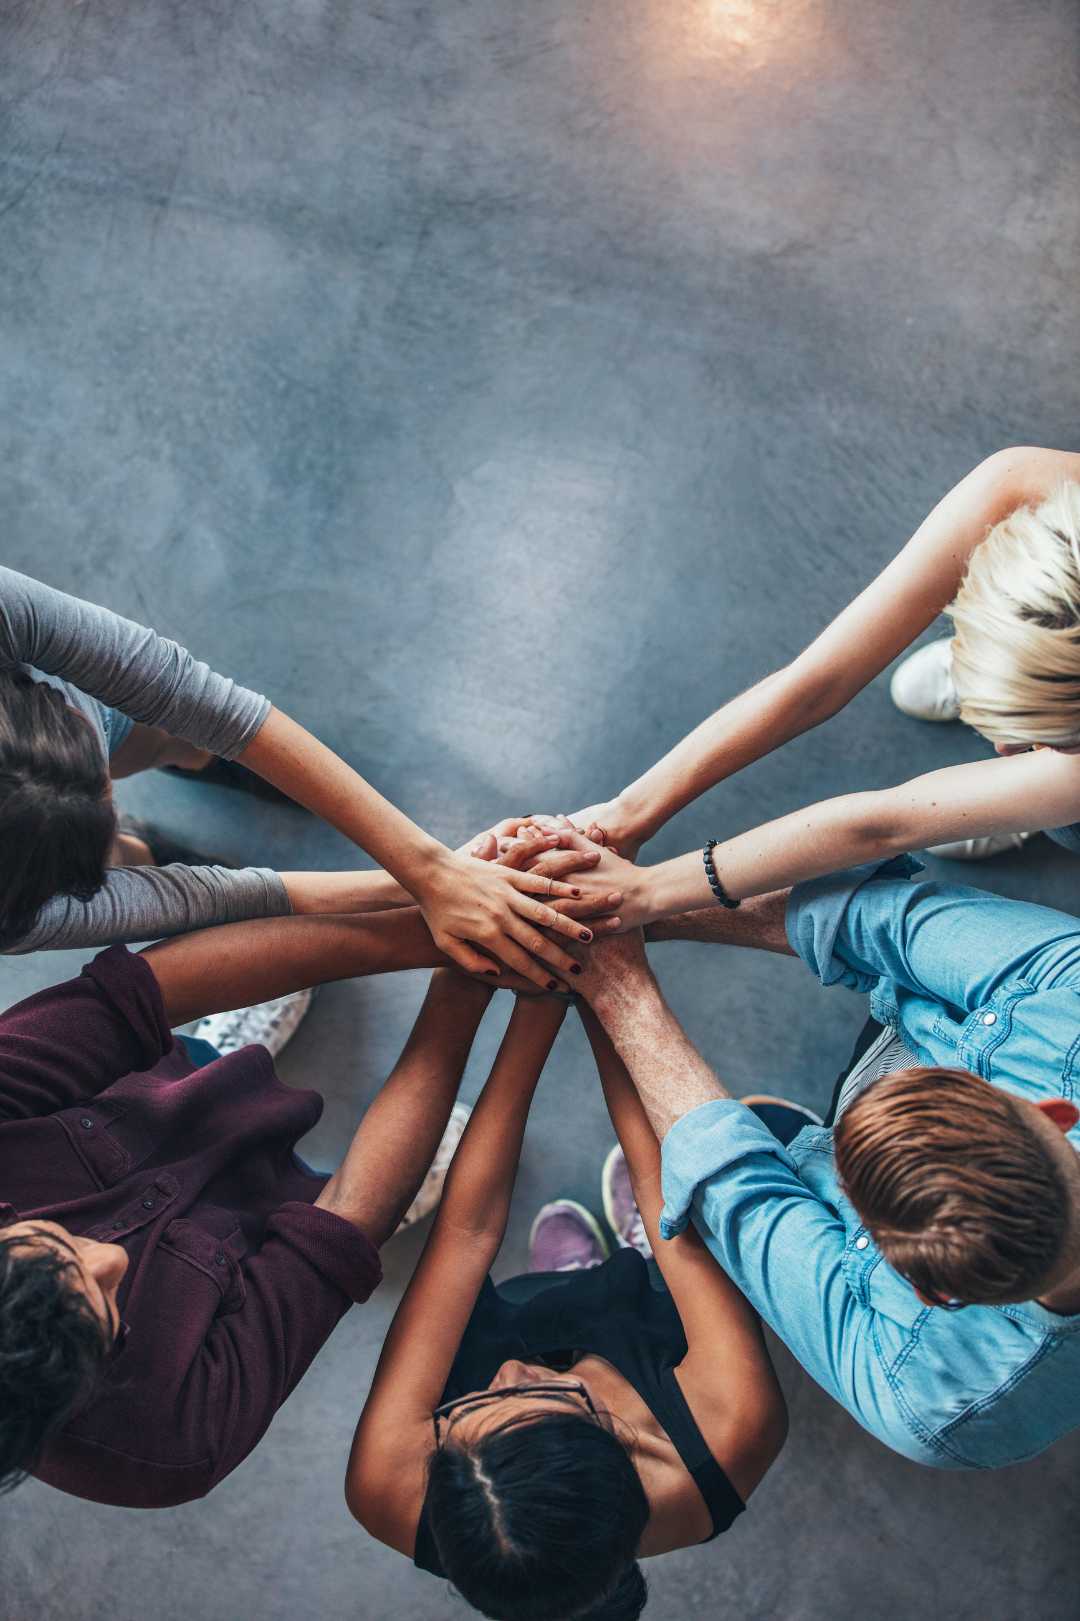 Rowan Center for Behavioral Health Career Opportunities Image showing a diverse set of hands together in unity with a concrete floor in the background